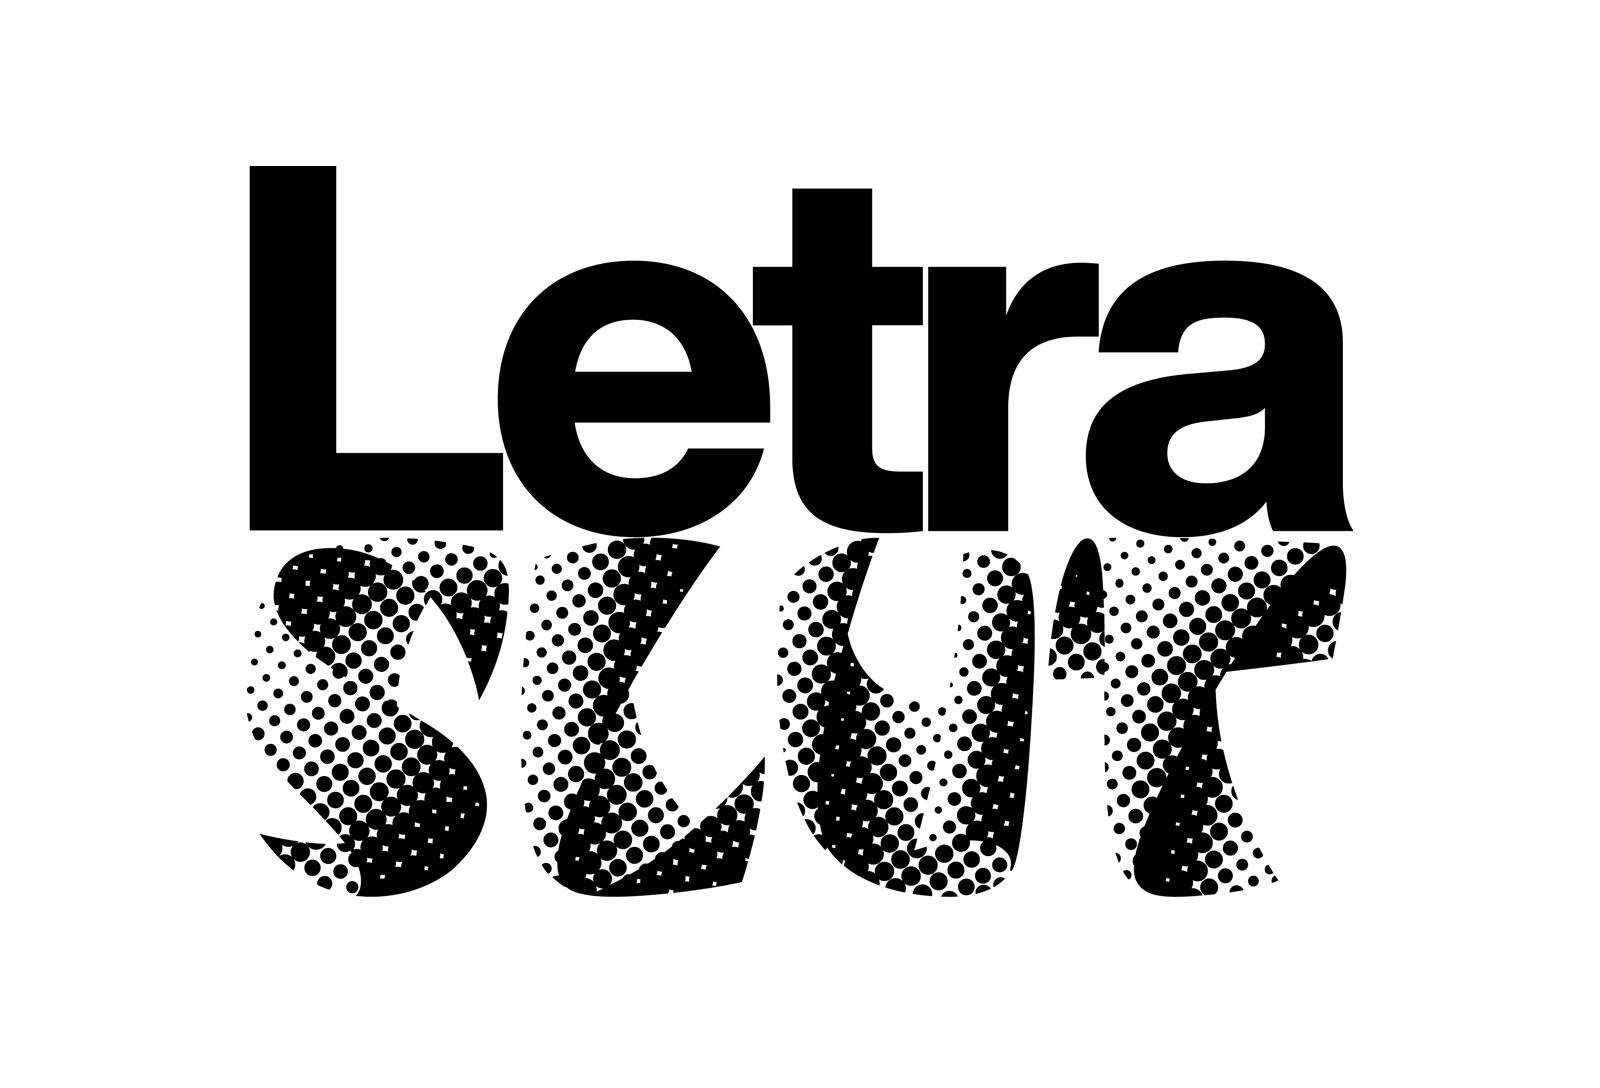 More information about "Letraslut: A wiki about dry transfer brands"